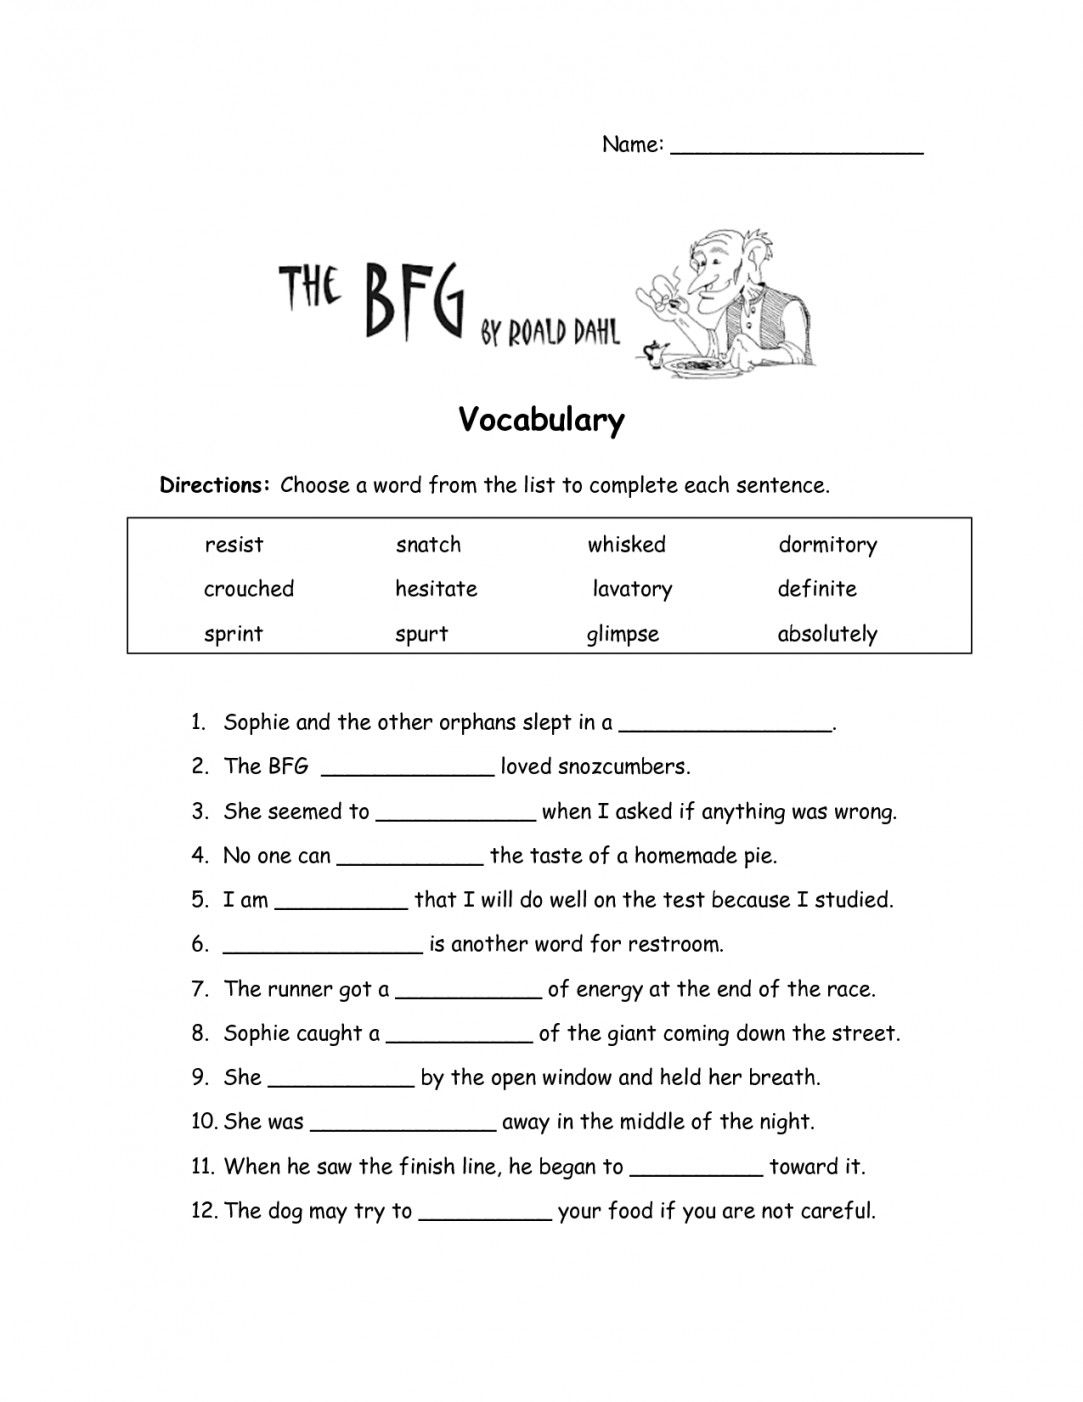 Free Printable Vocabulary Worksheets | Lostranquillos - Free Printable Portuguese Worksheets